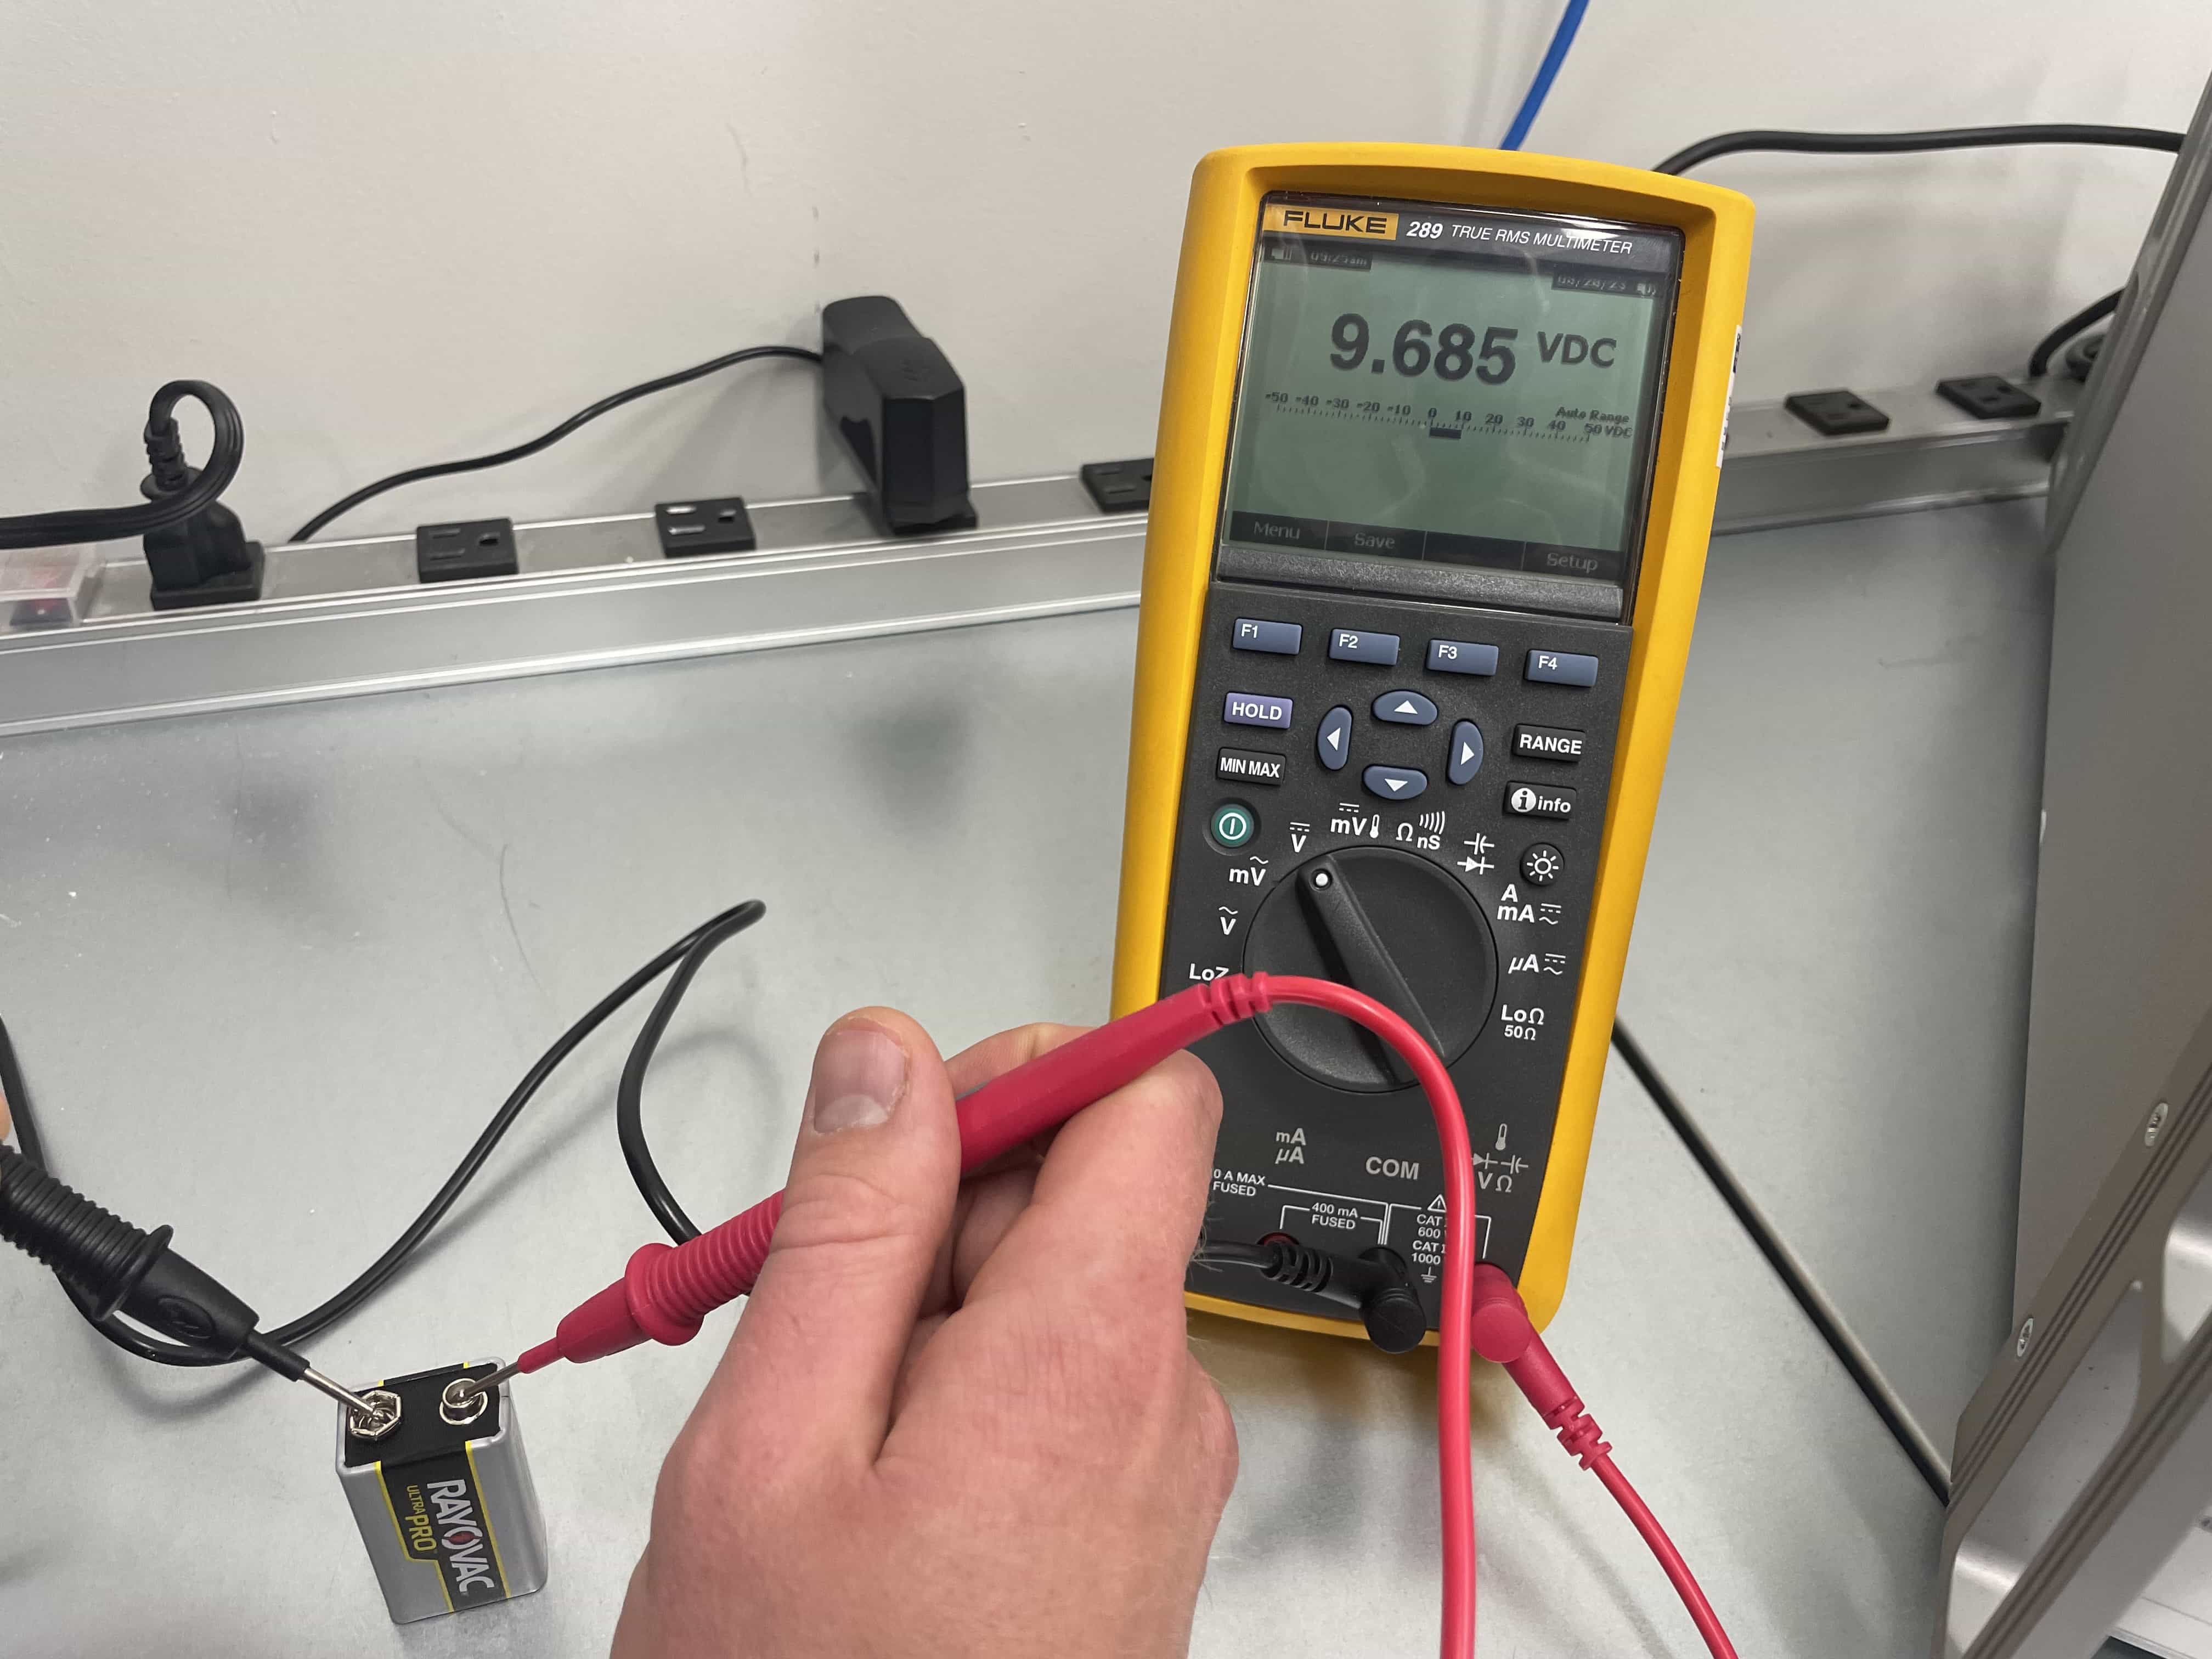 How to Use a Multimeter - Connect Leads to Circuit/Component